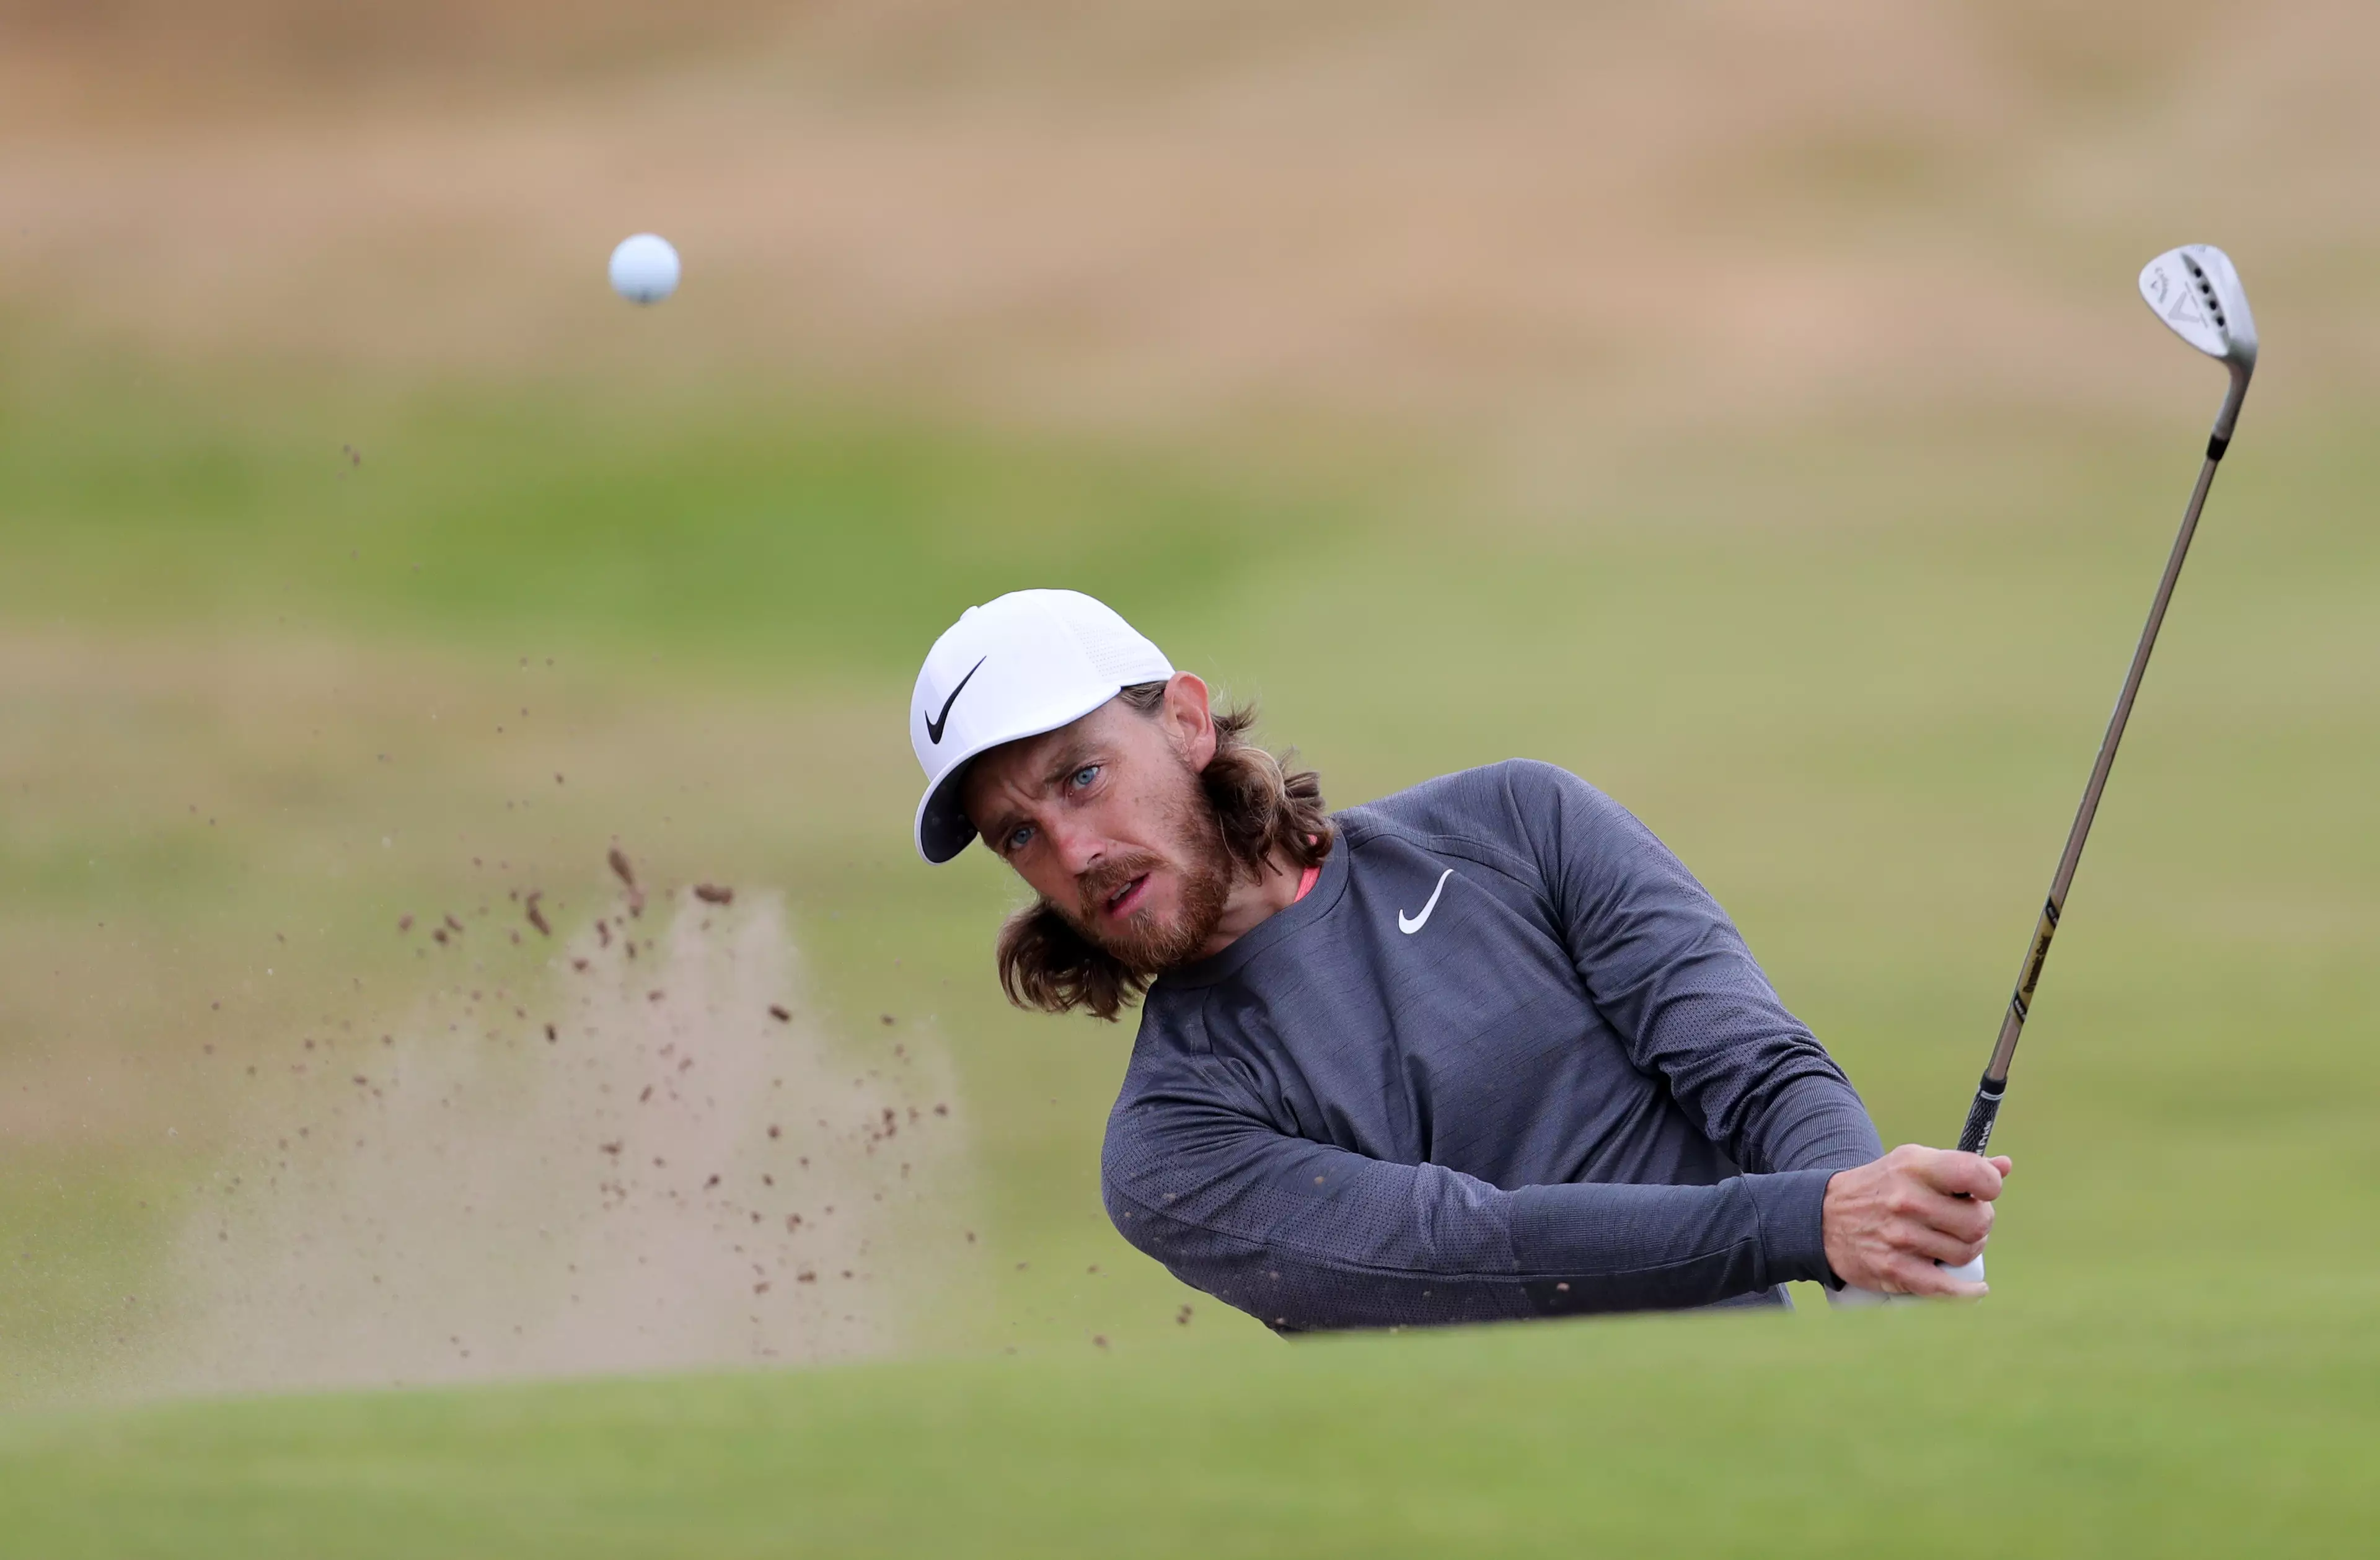 Fleetwood playing at the Open. Image: PA Images